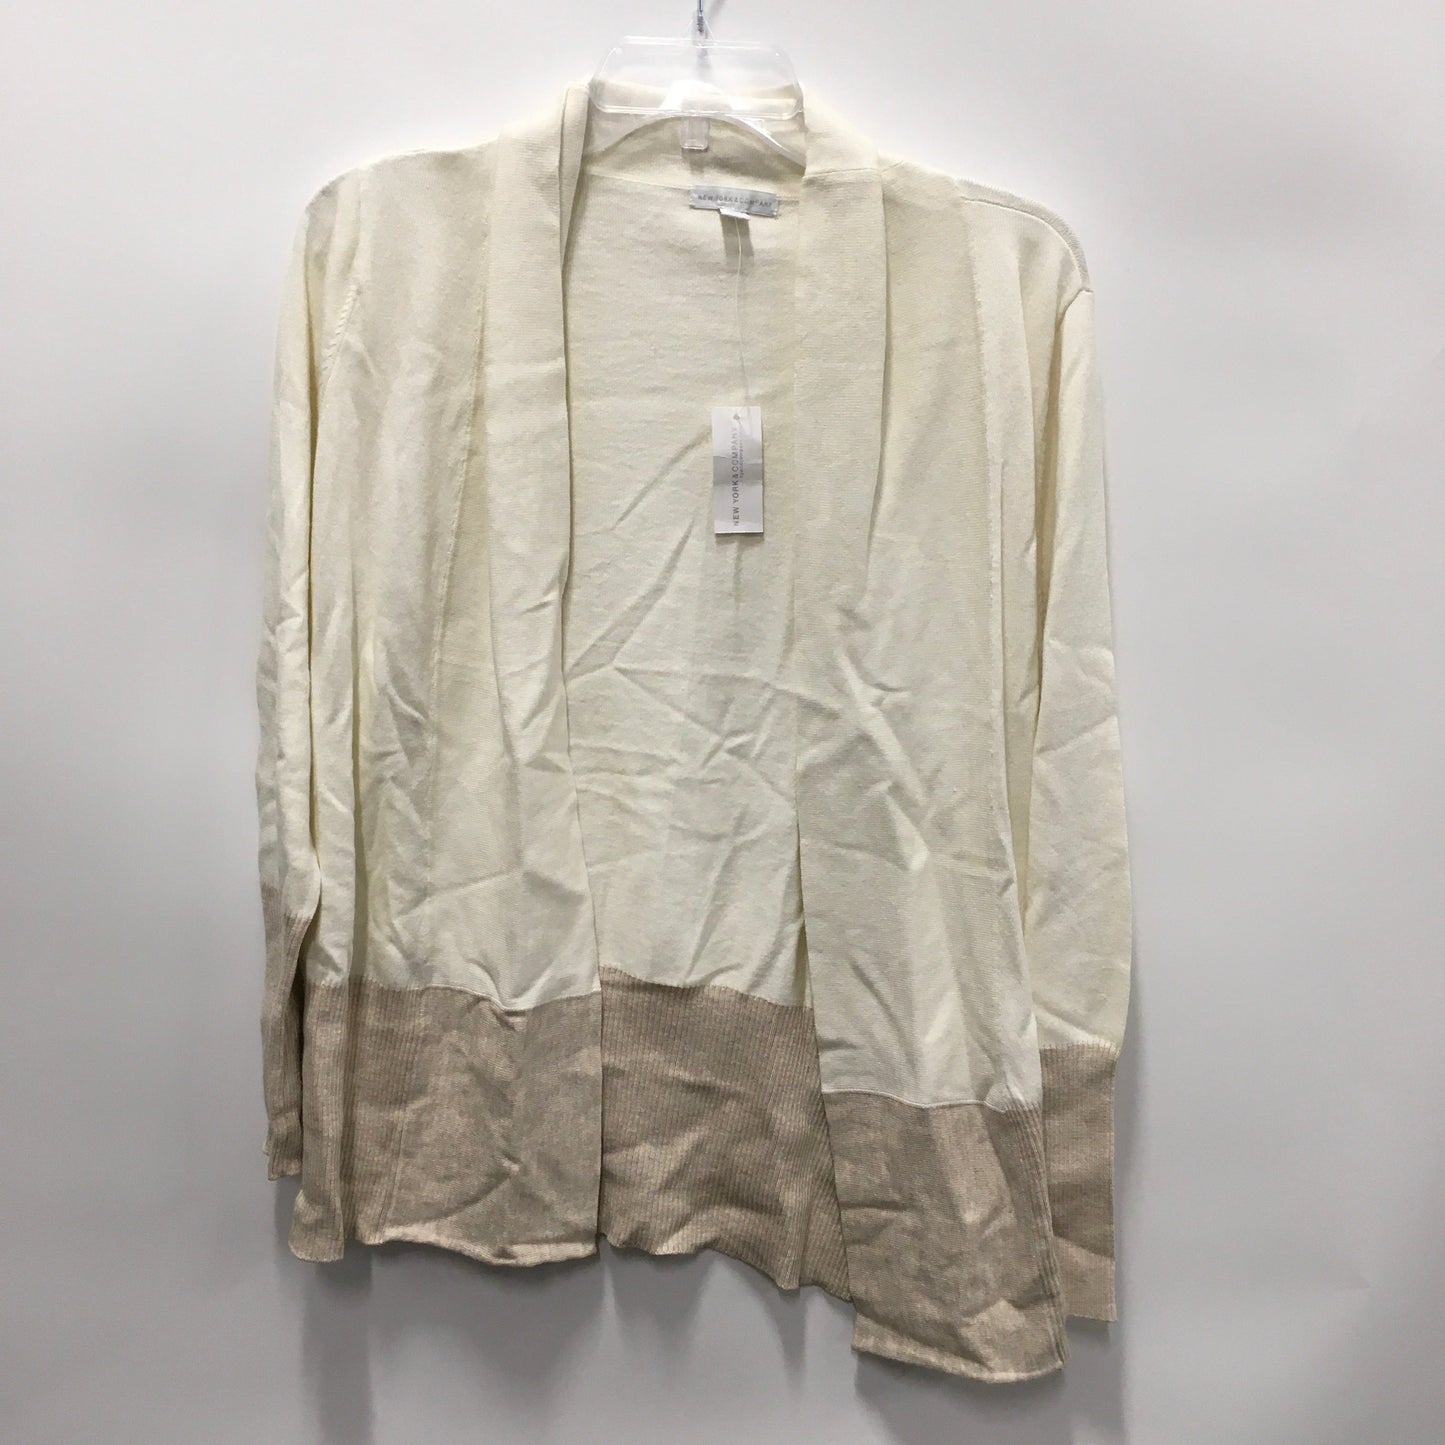 Cream Cardigan New York And Co, Size L